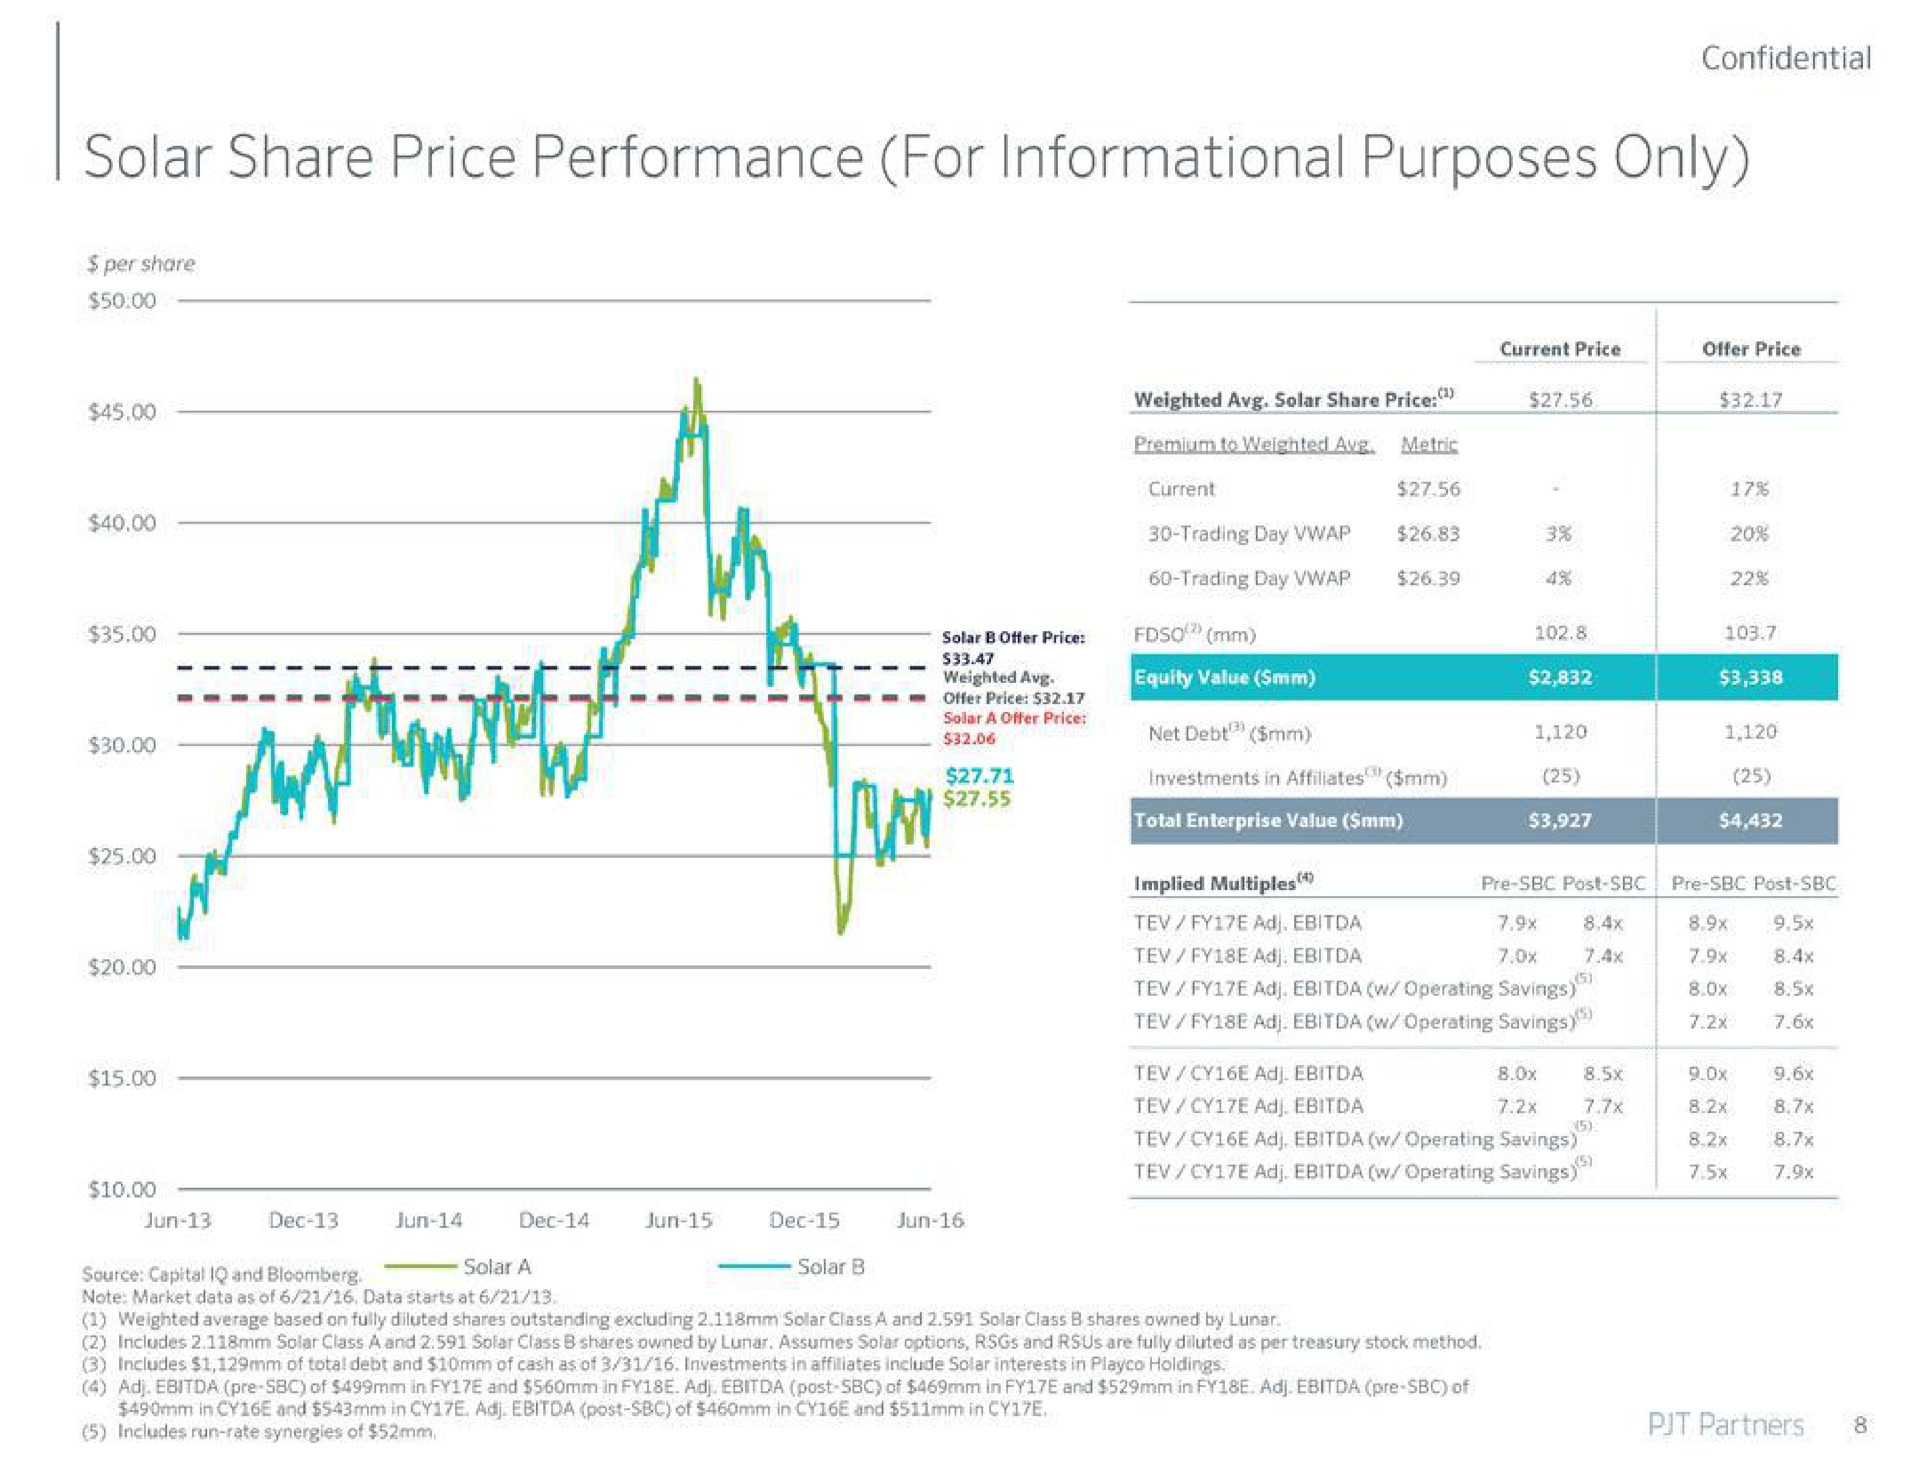 solar share price performance for informational purposes only | PJT Partners